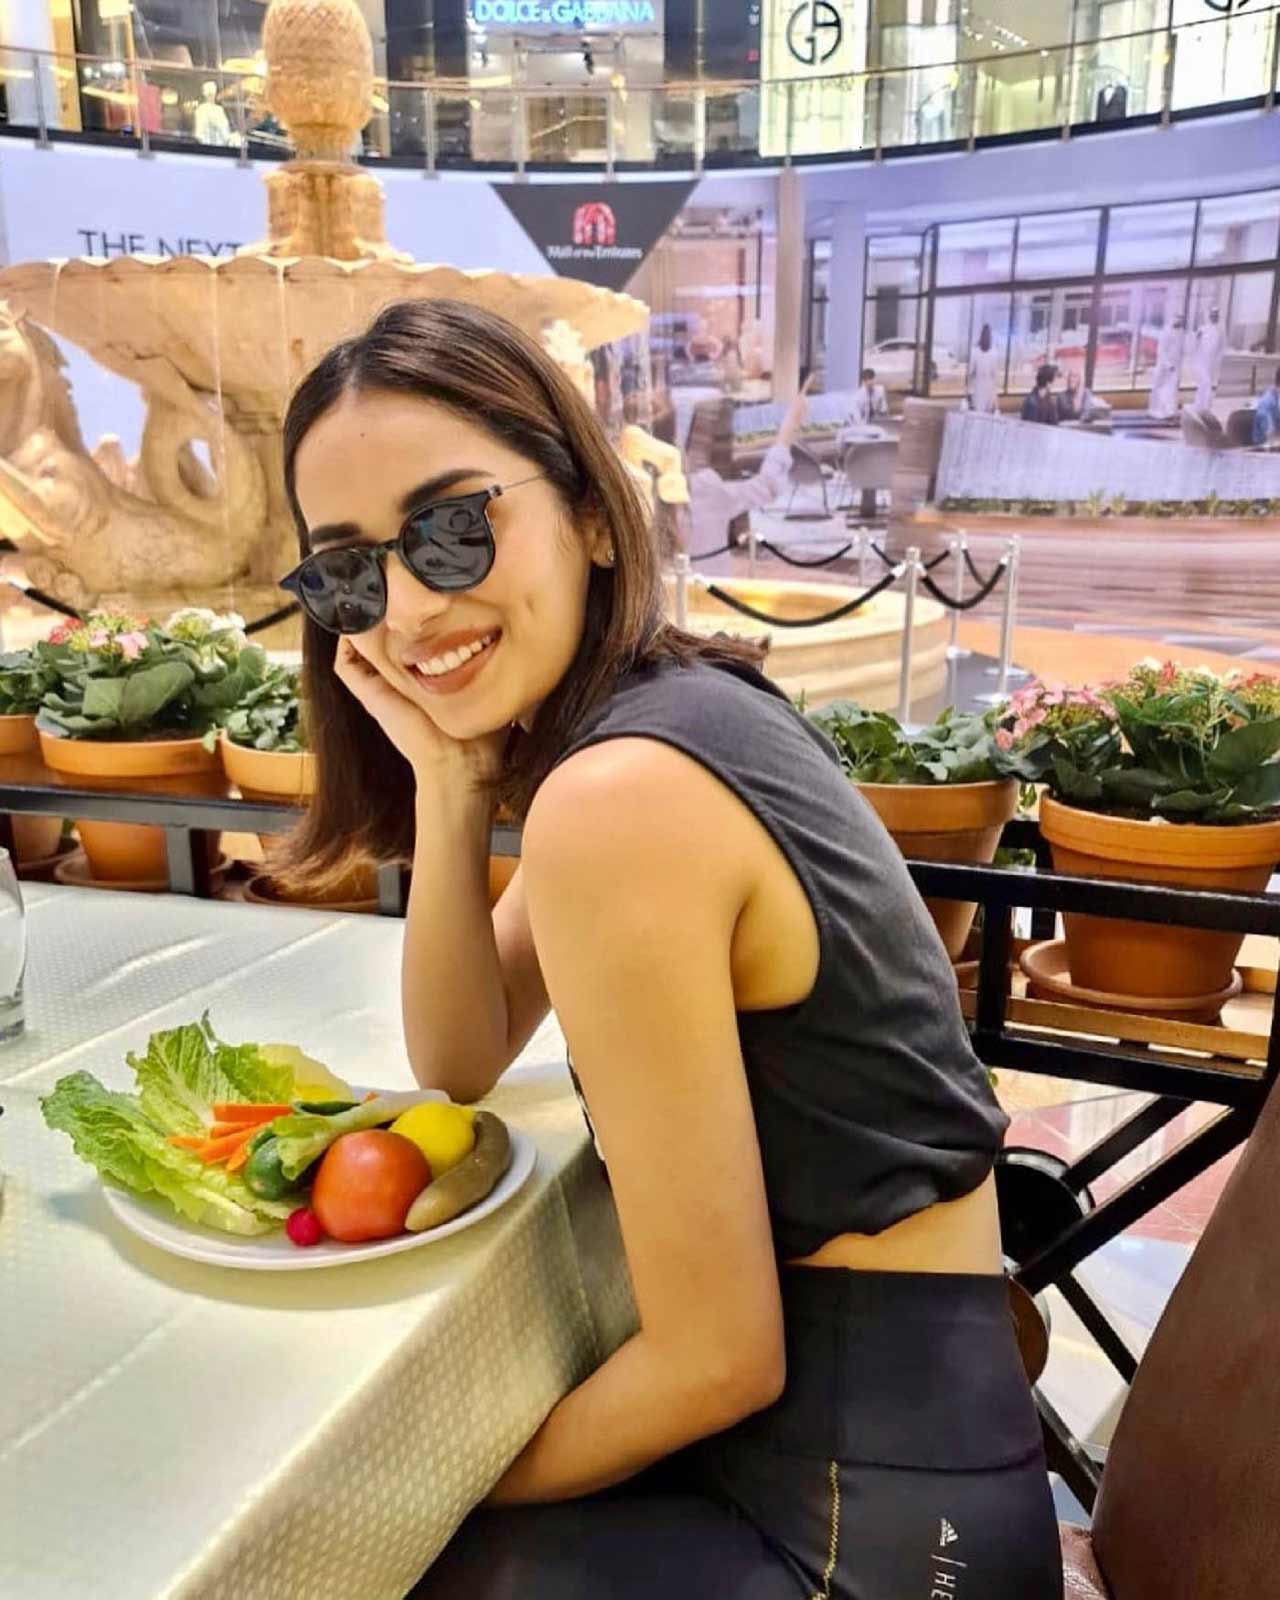 Manushi Chillar: She is a strong advocate for vegetarianism and has expressed her views on the subject even on global platforms. Manushi said, 